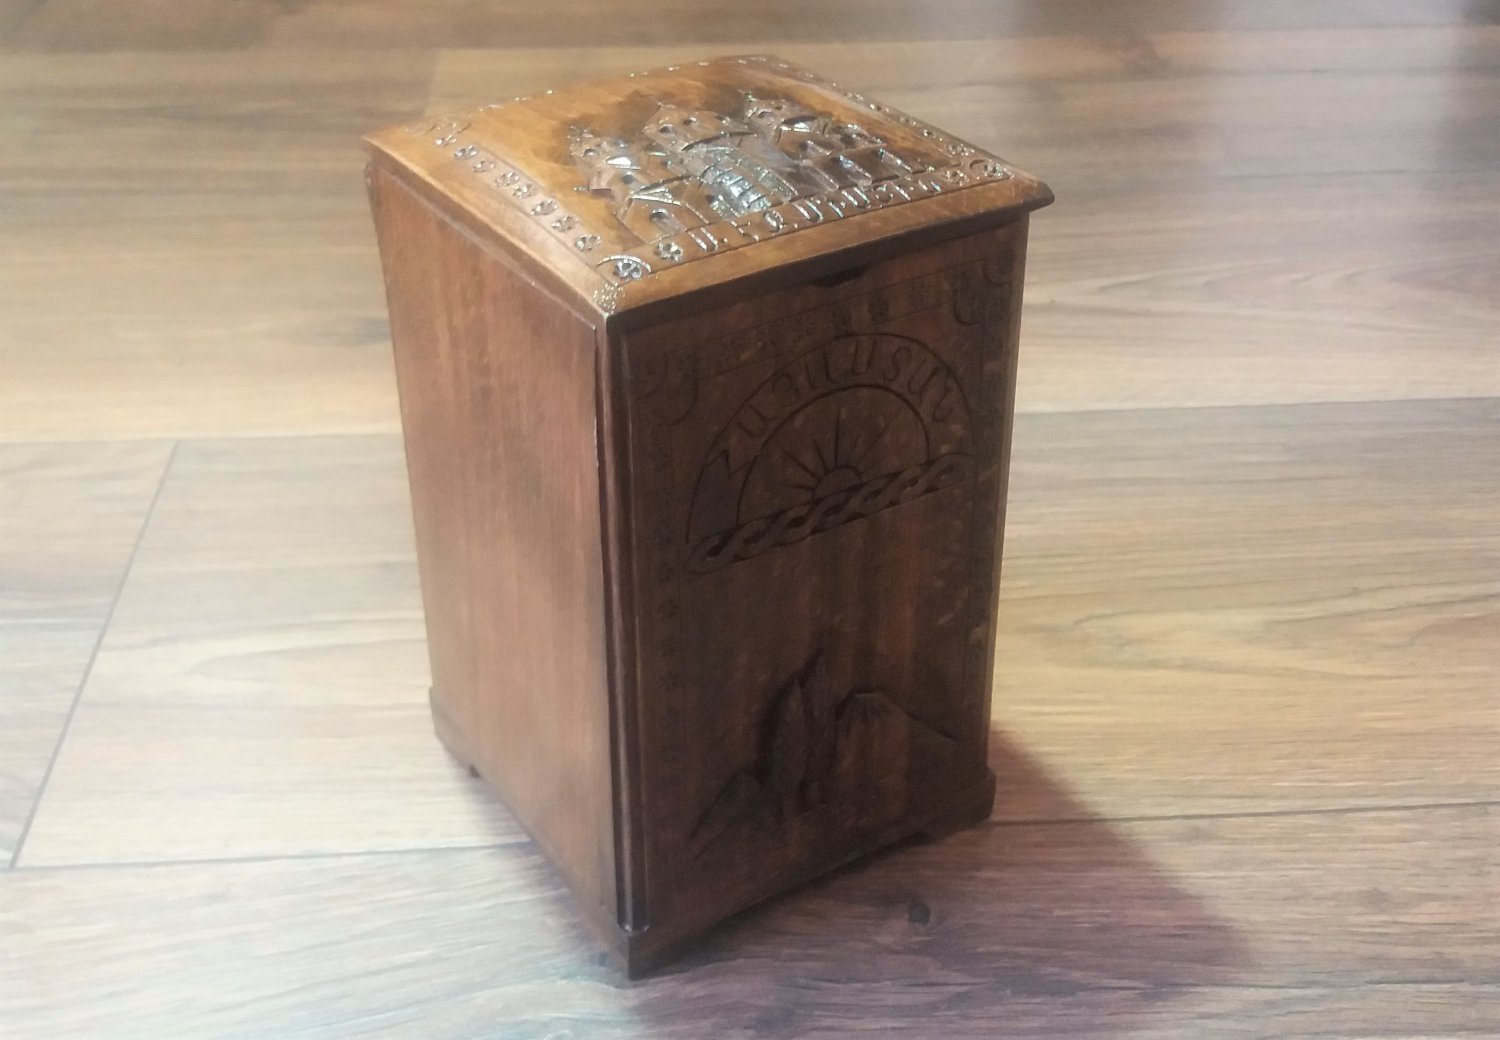 Handcrafted Armenian Wooden Box with Mount Ararat and Etchmiadzin Cathedral, Kitchen Storage Box